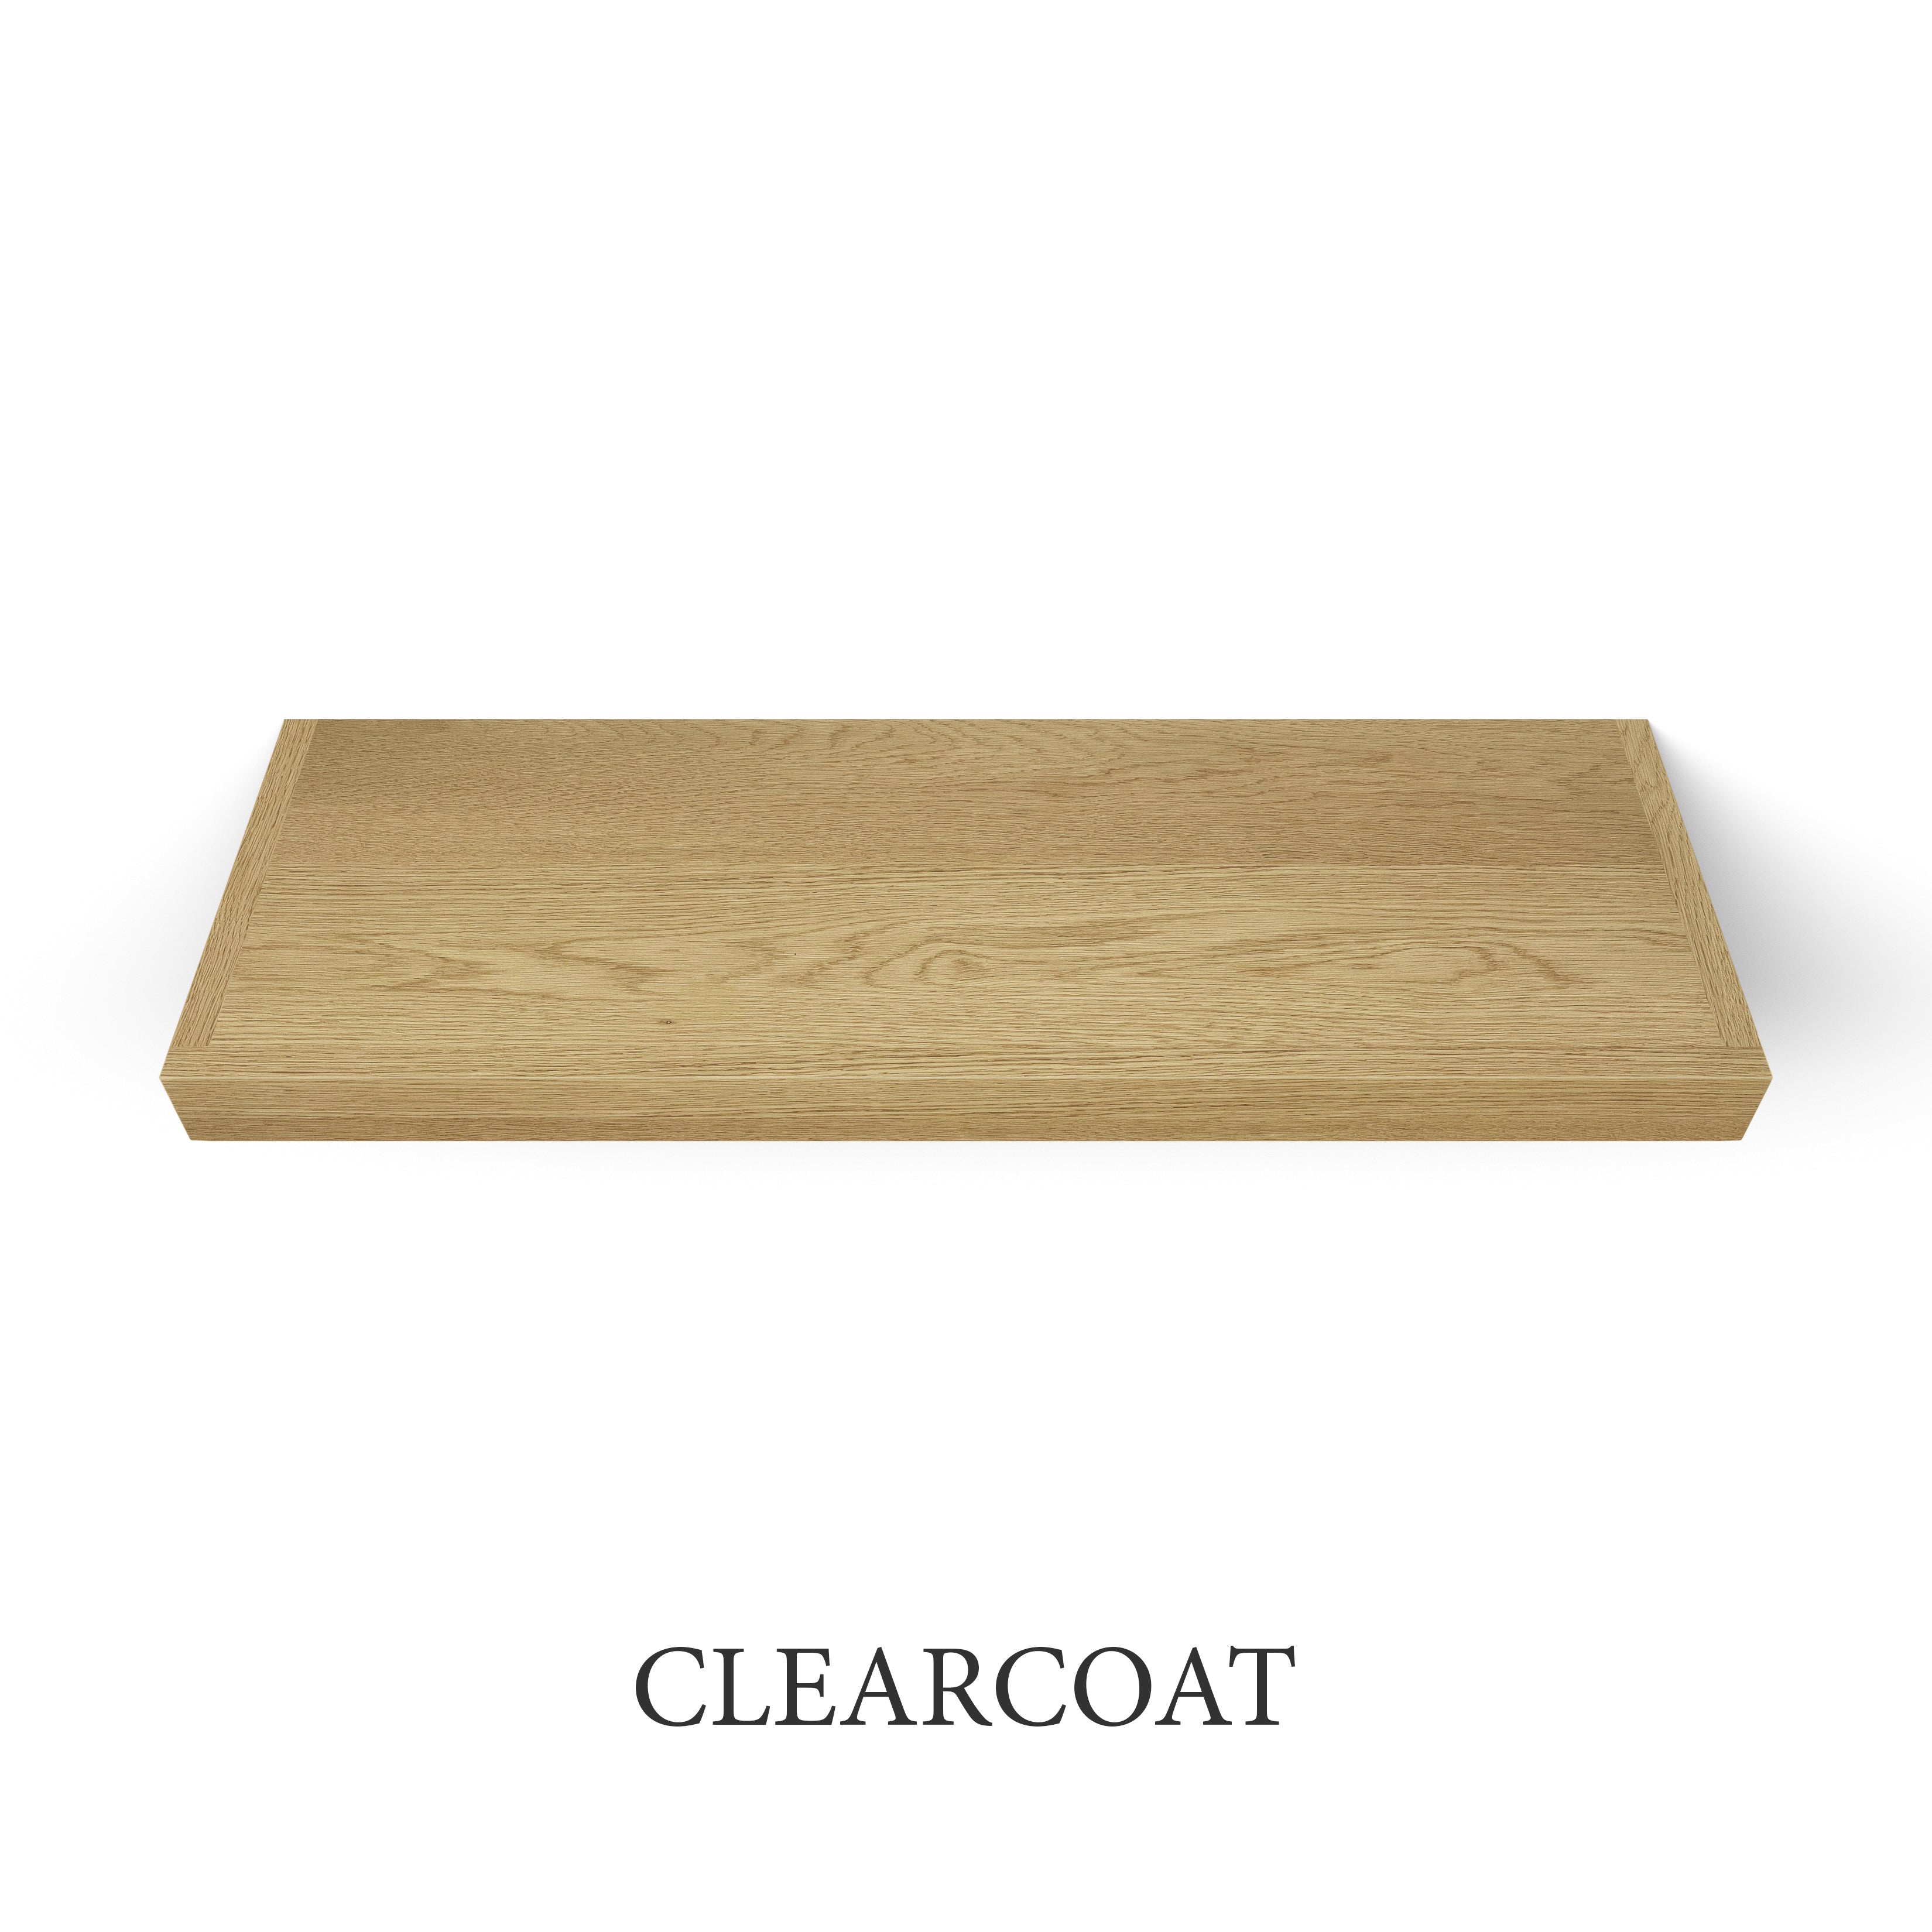 clearcoat White Oak 2 Inch Thick LED Lighted Floating Shelf - Battery